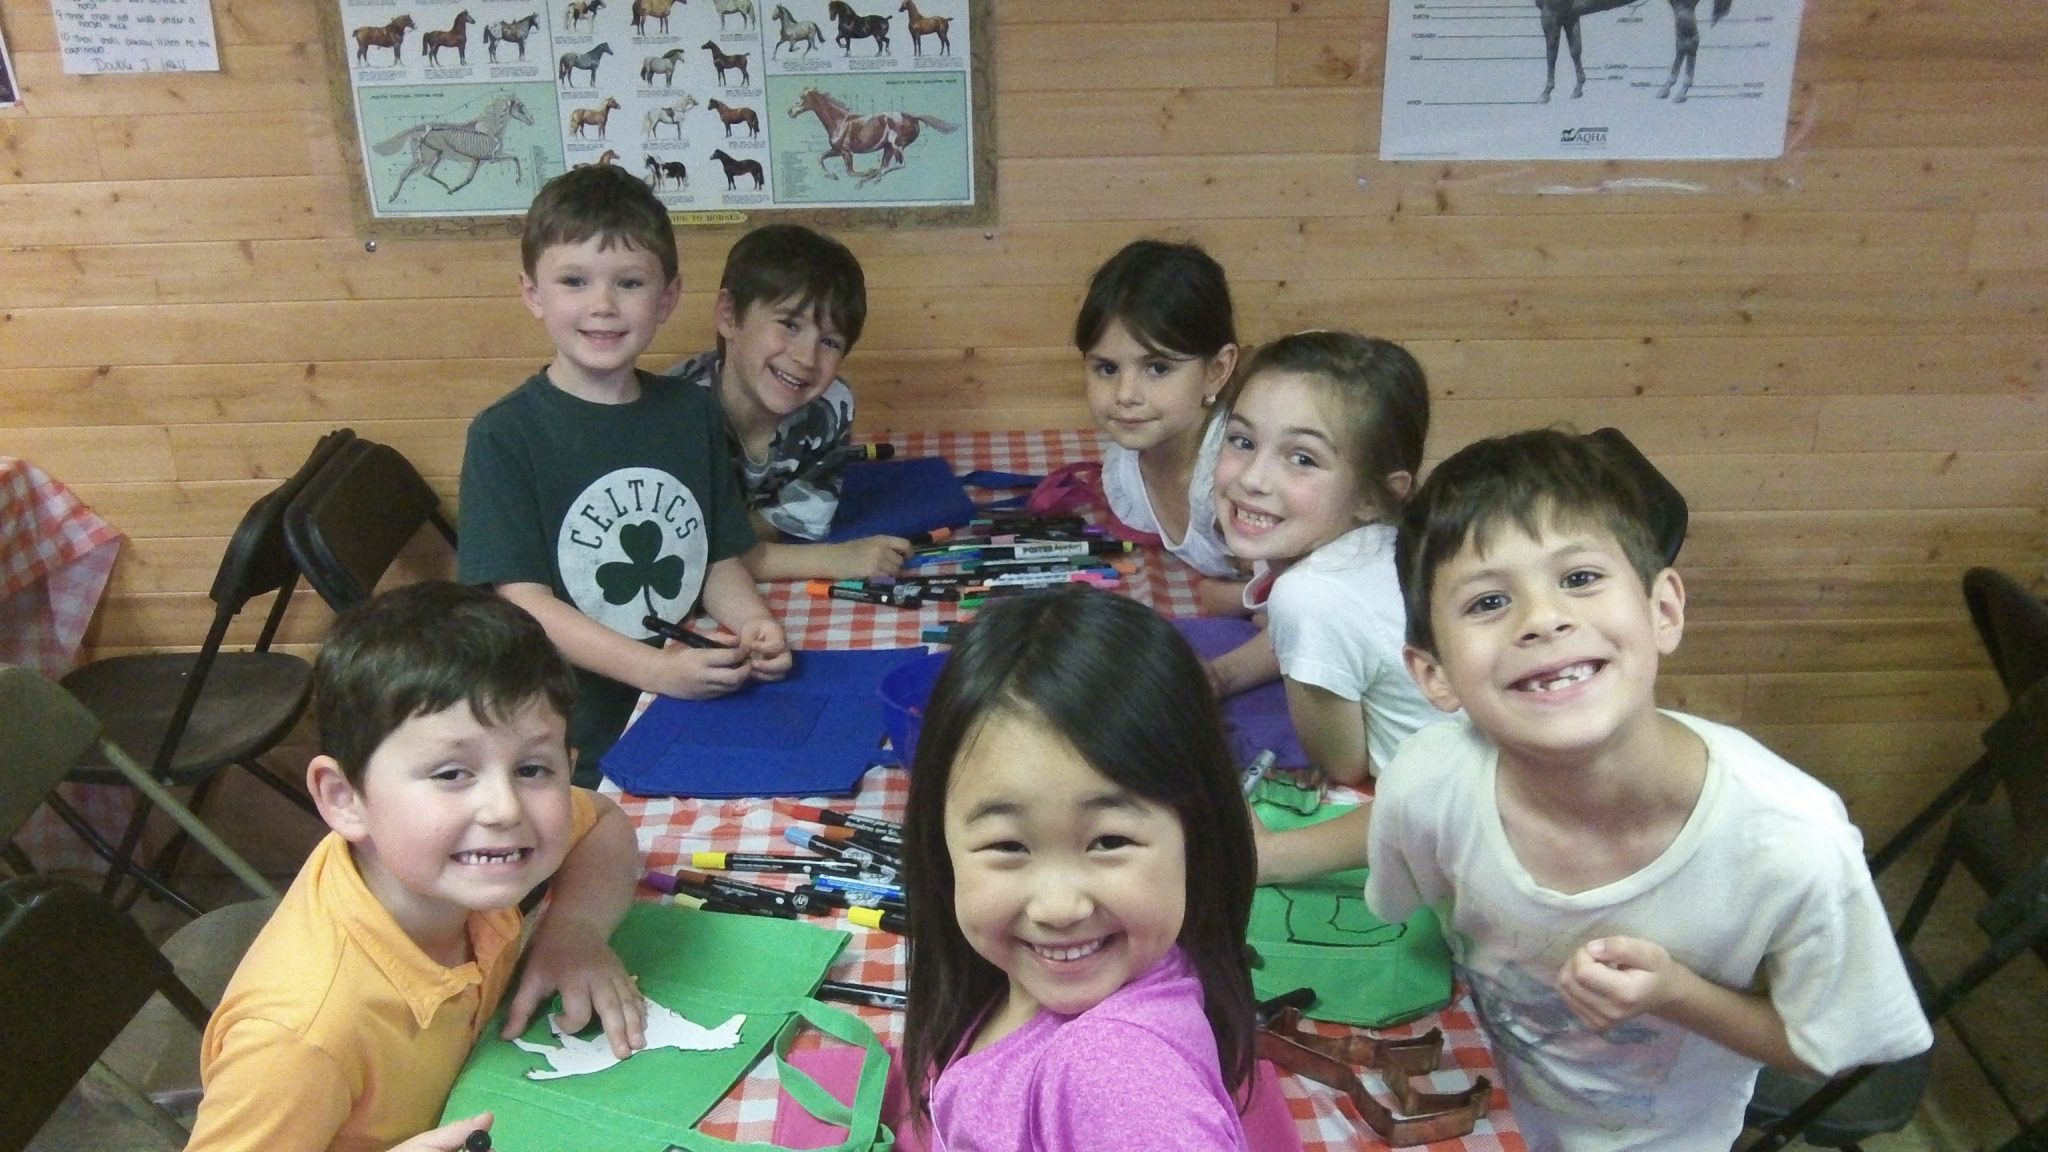 A group of kids making crafts.